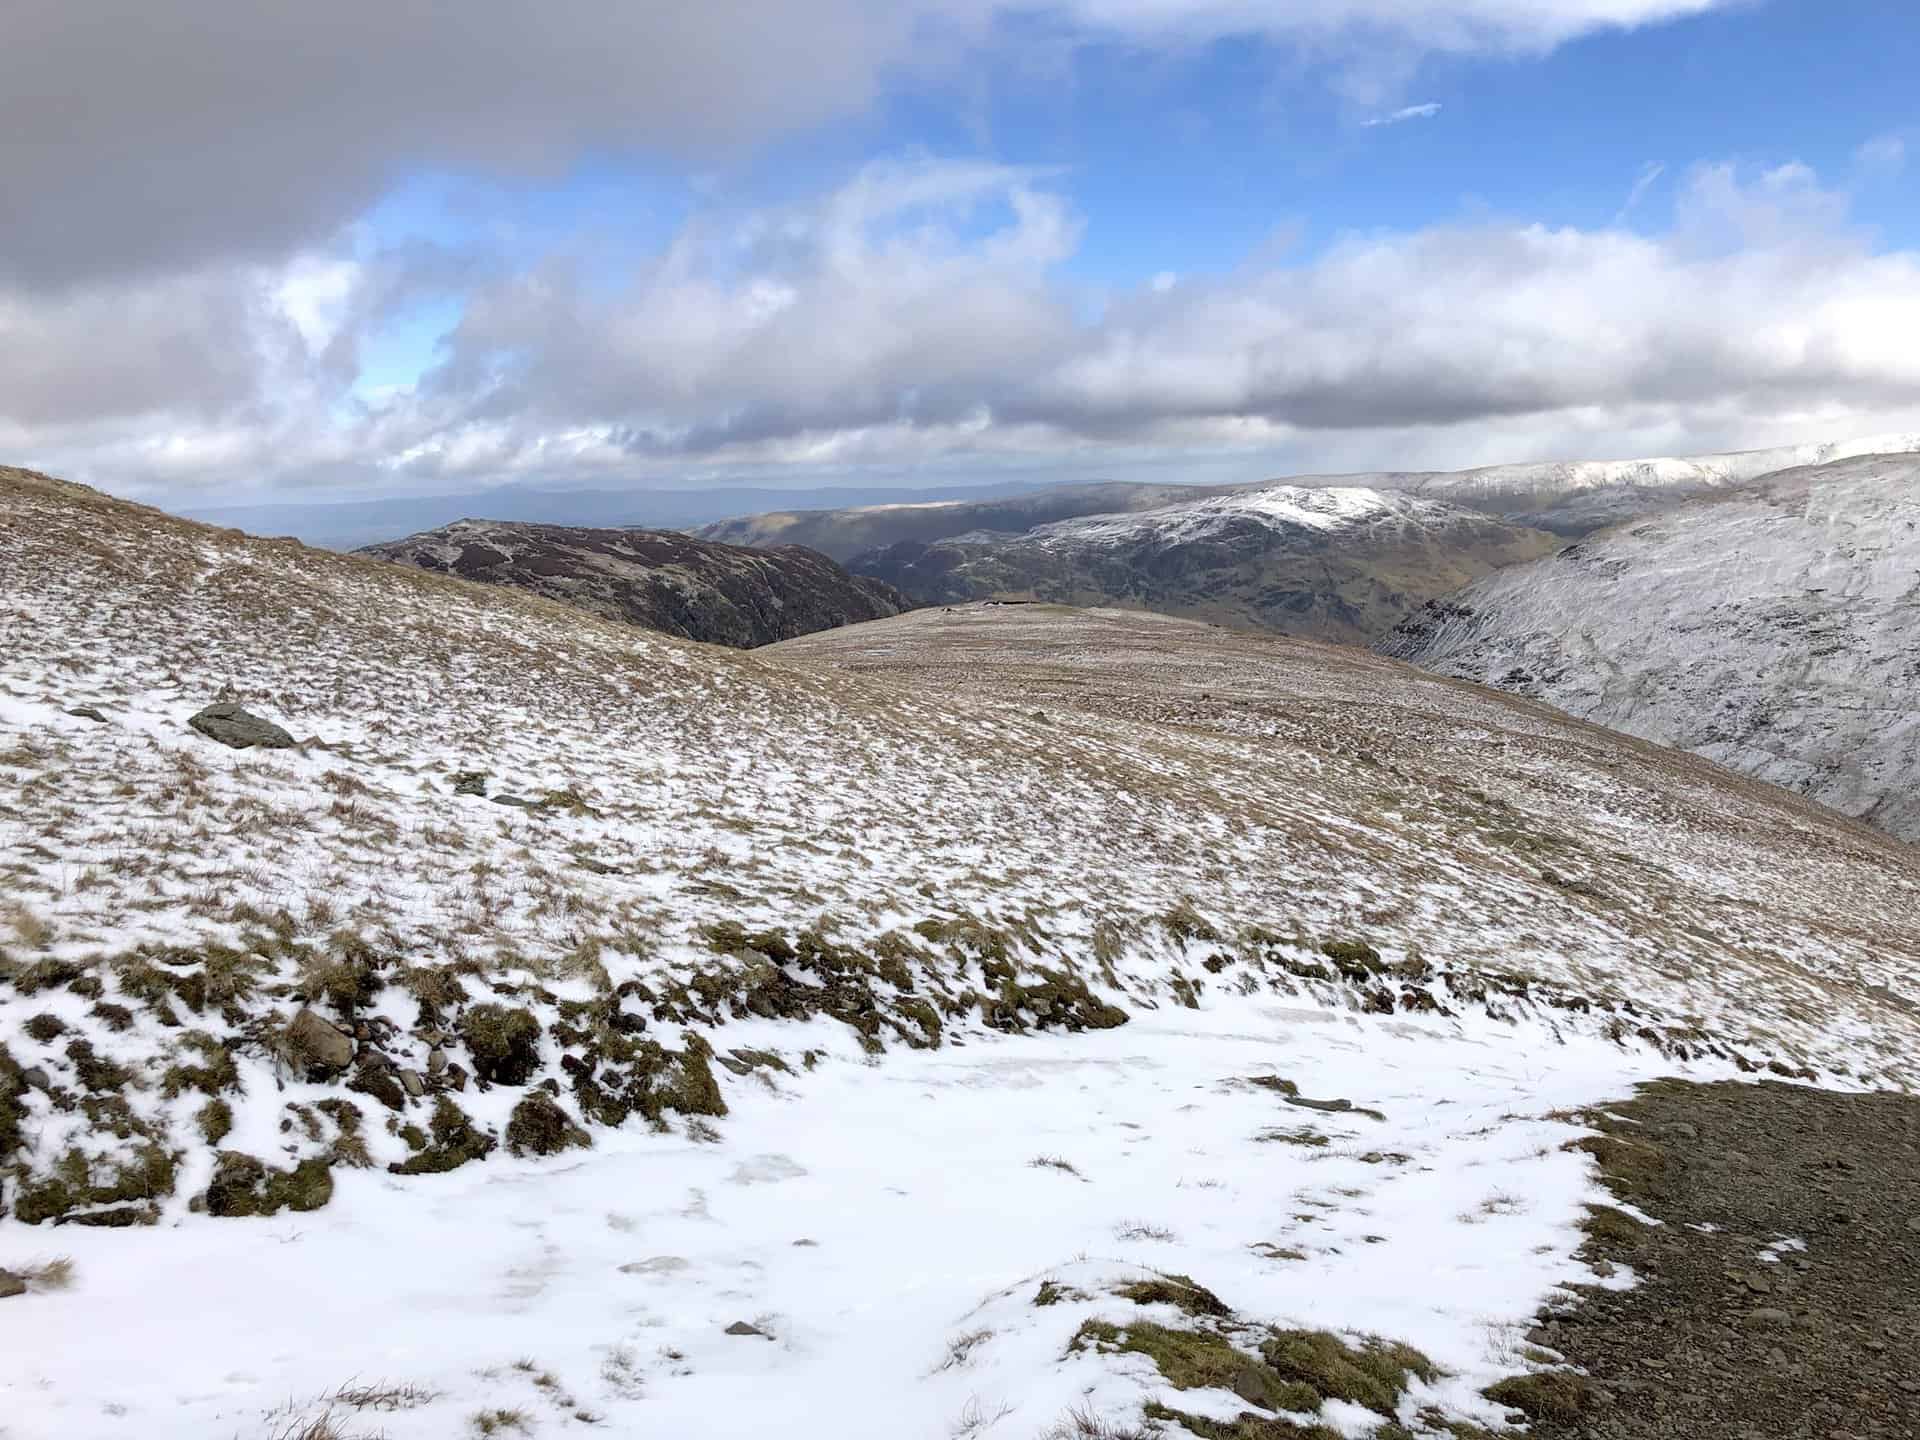 Looking east, Glenridding Common offers a tranquil scene on the Helvellyn walk from Glenridding.